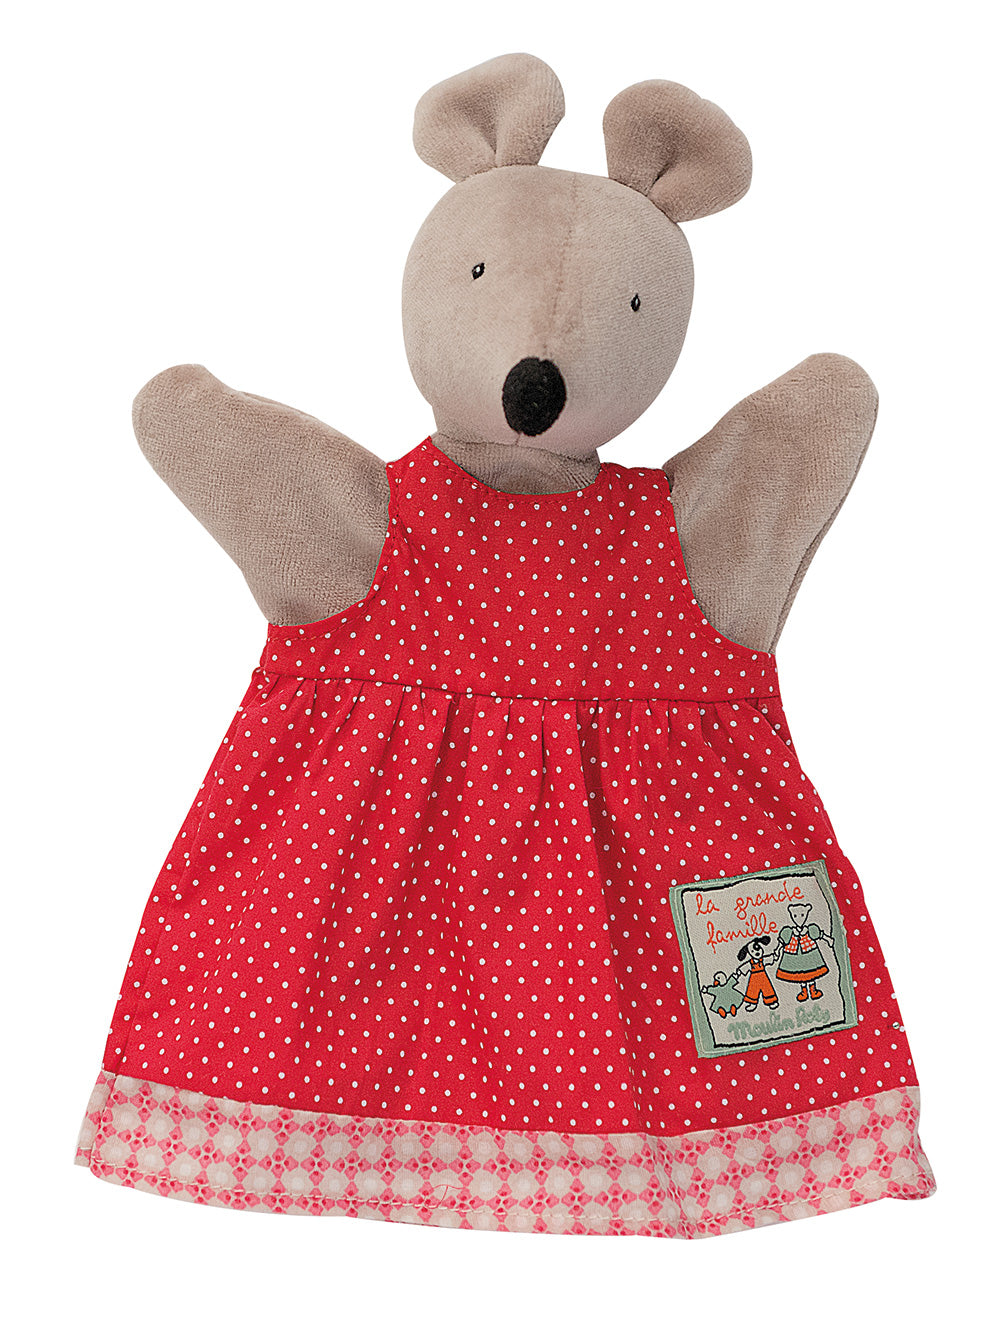 Moulin Roty | Hand Puppet | 'La Grande Famille' Nini the Mouse in Red Dress | Size: 25cm | Age: 0+